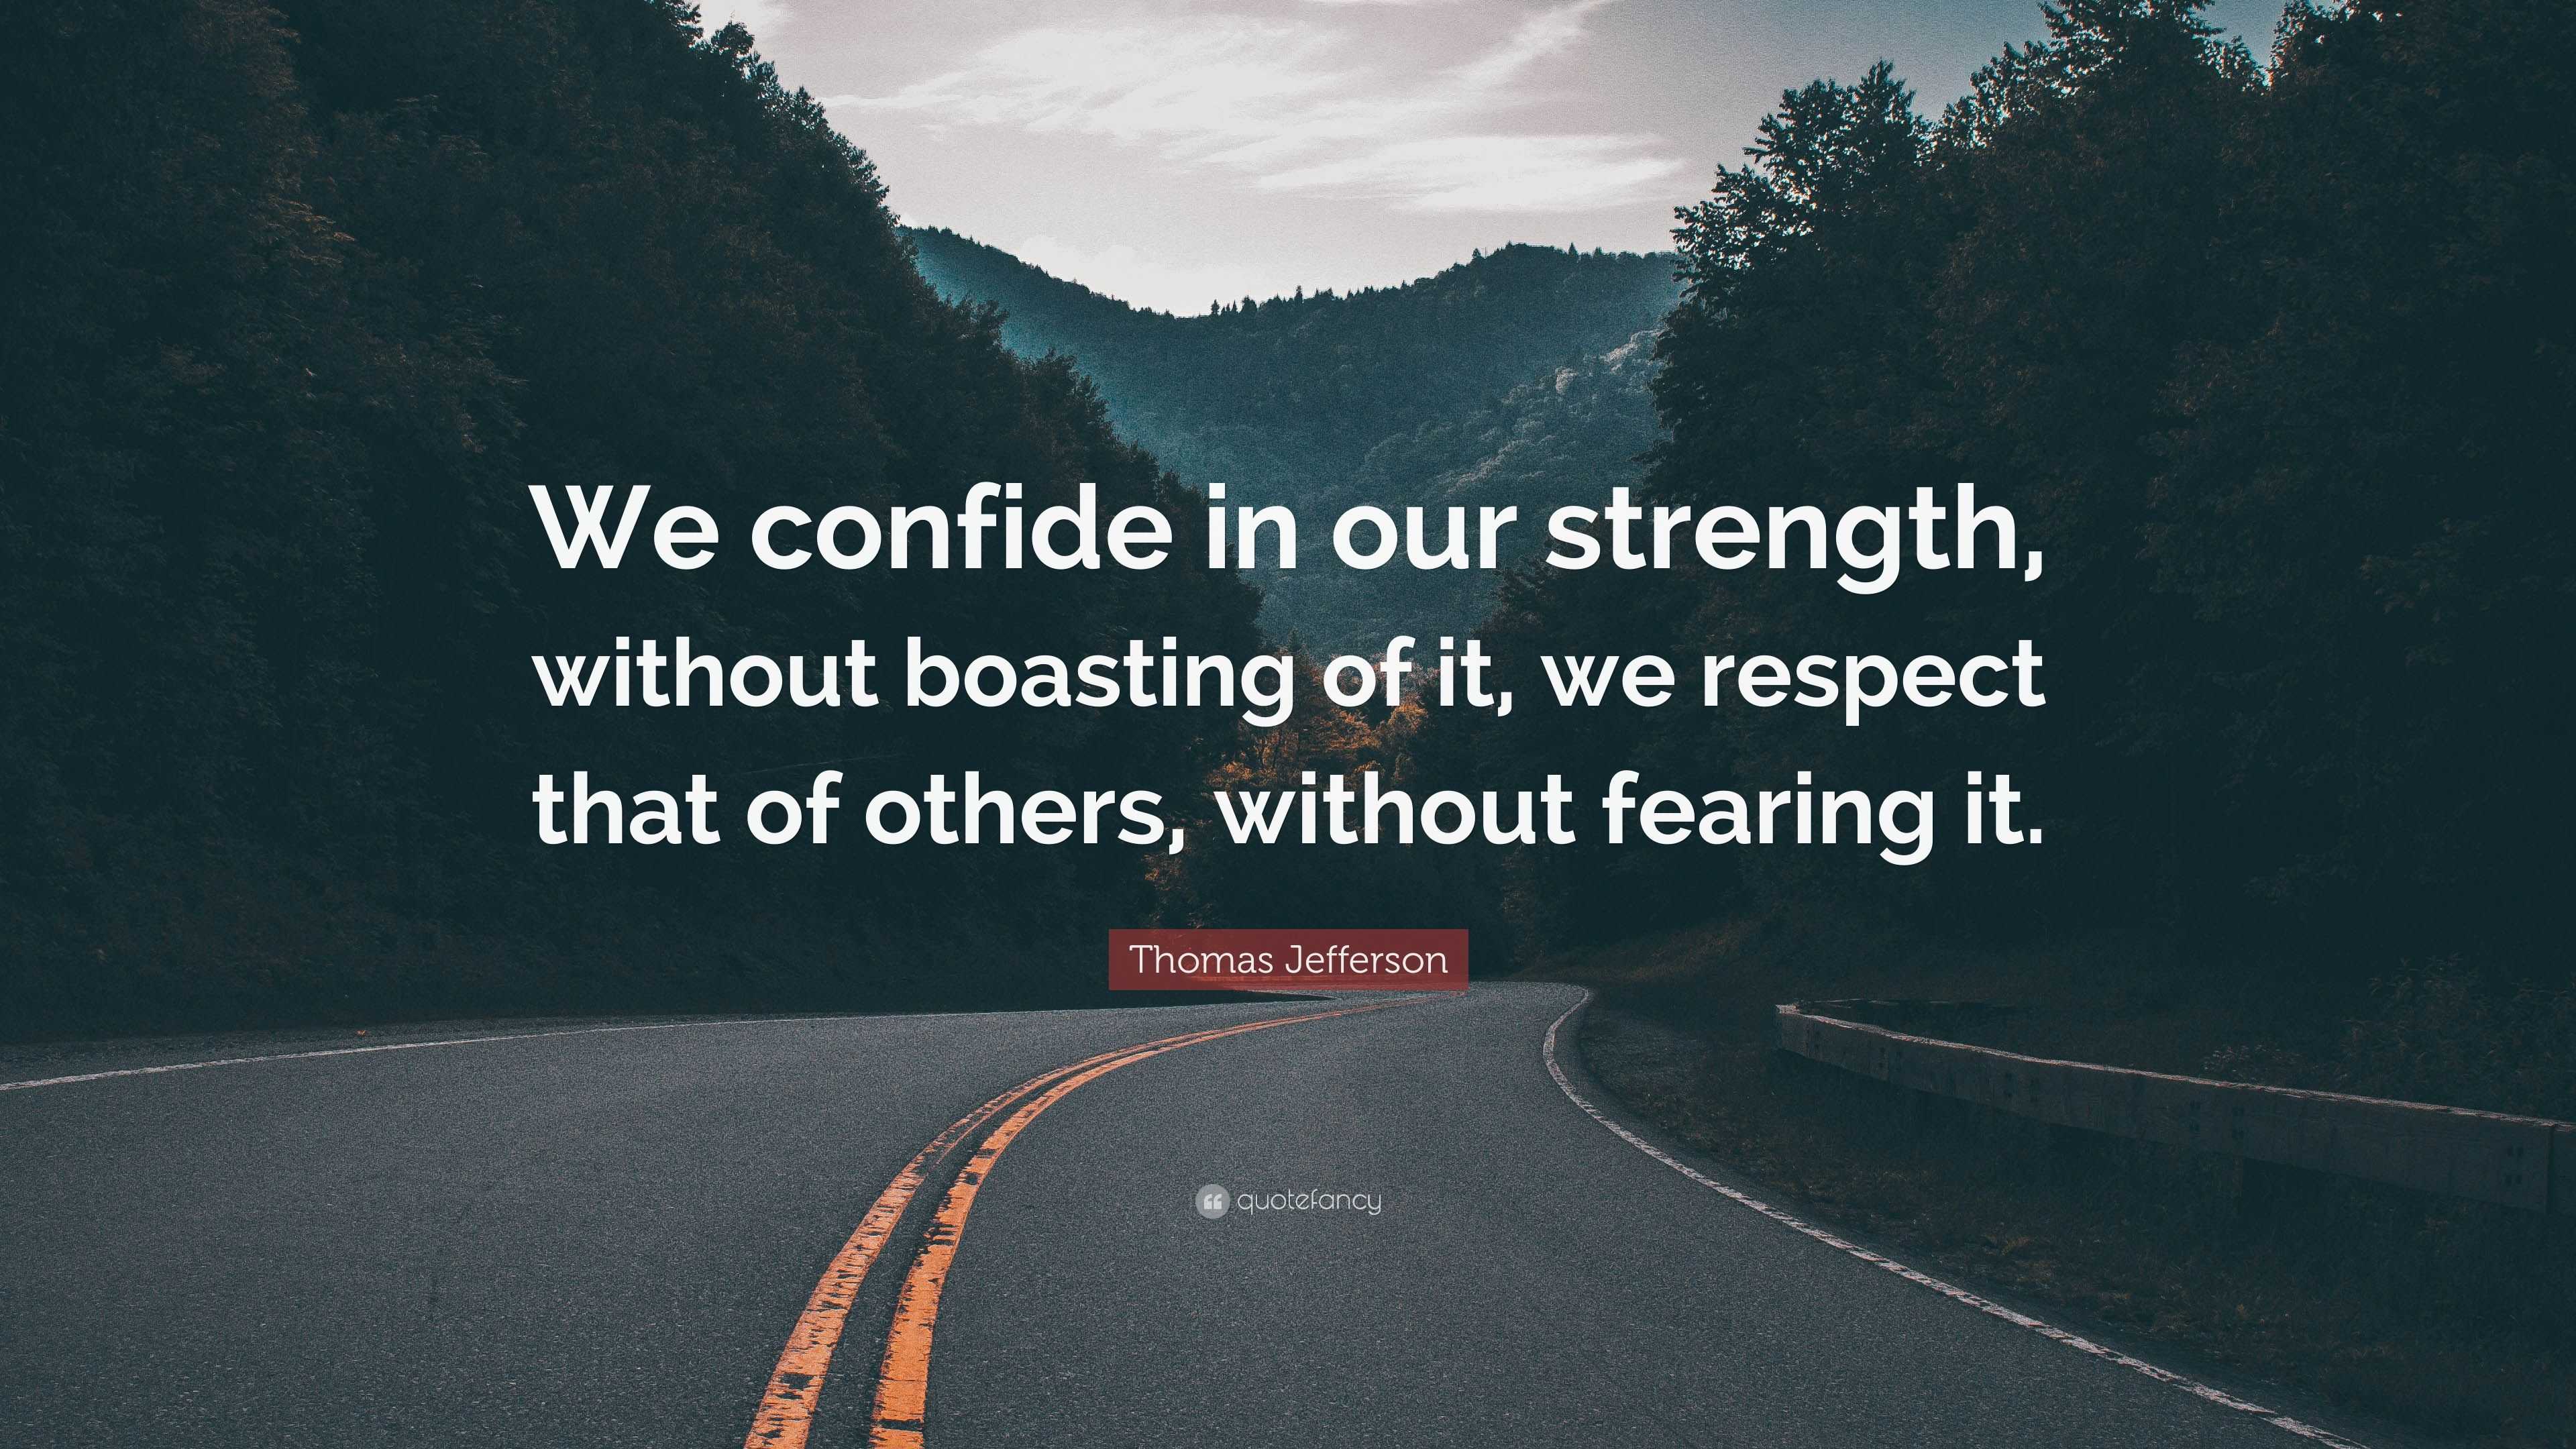 Thomas Jefferson Quote: “We confide in our strength, without boasting ...